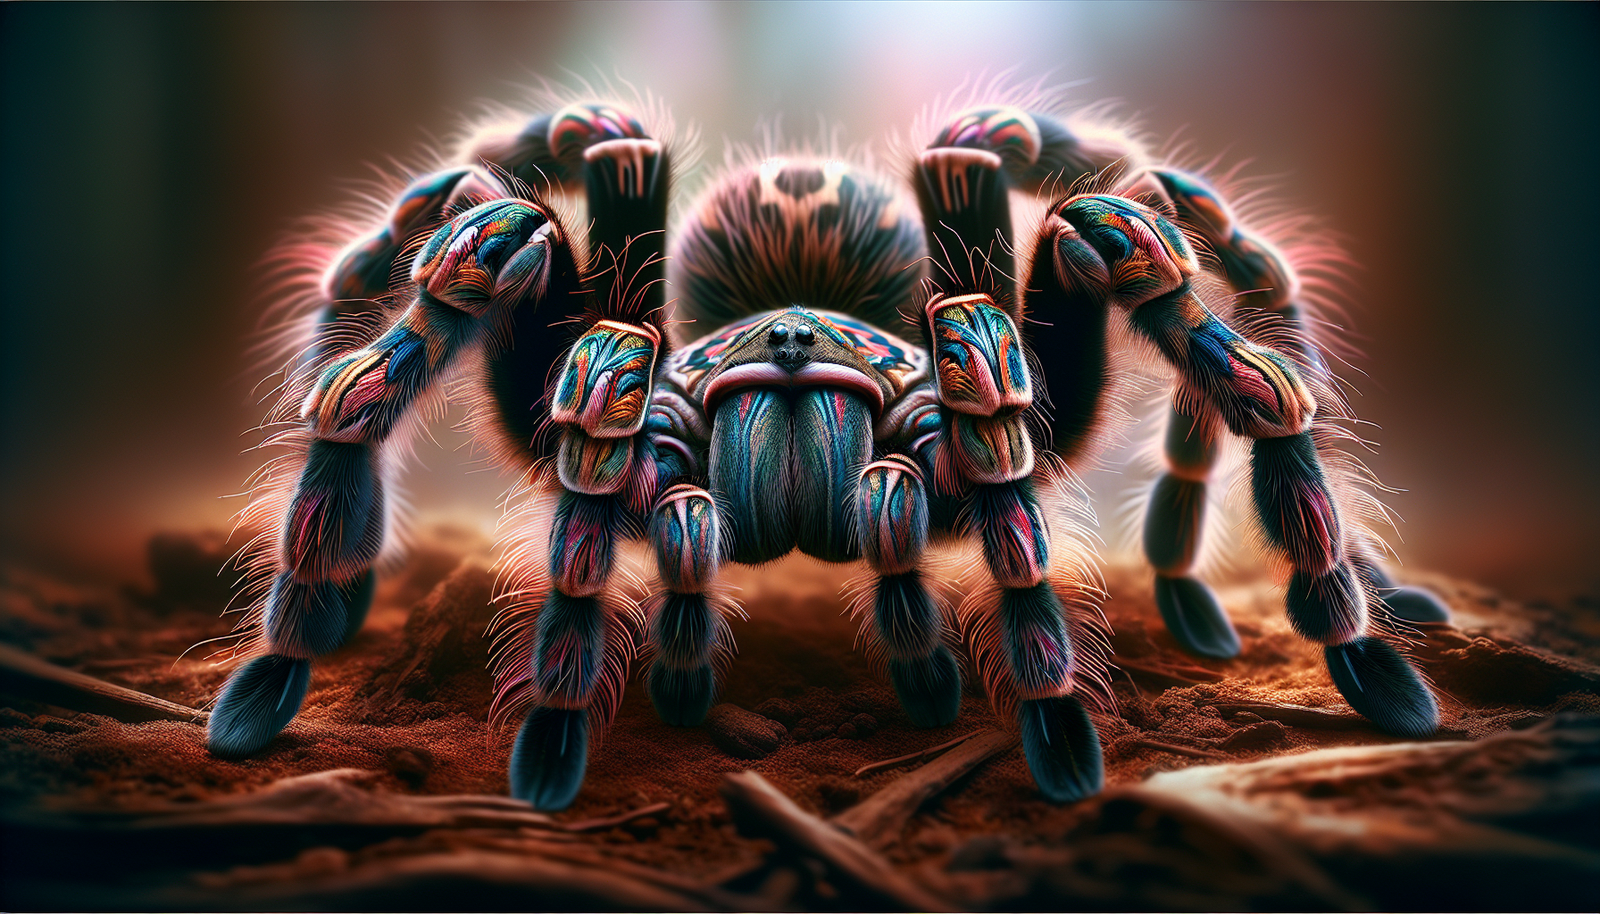 What Is The Role Of The Male Tarantula After Mating?